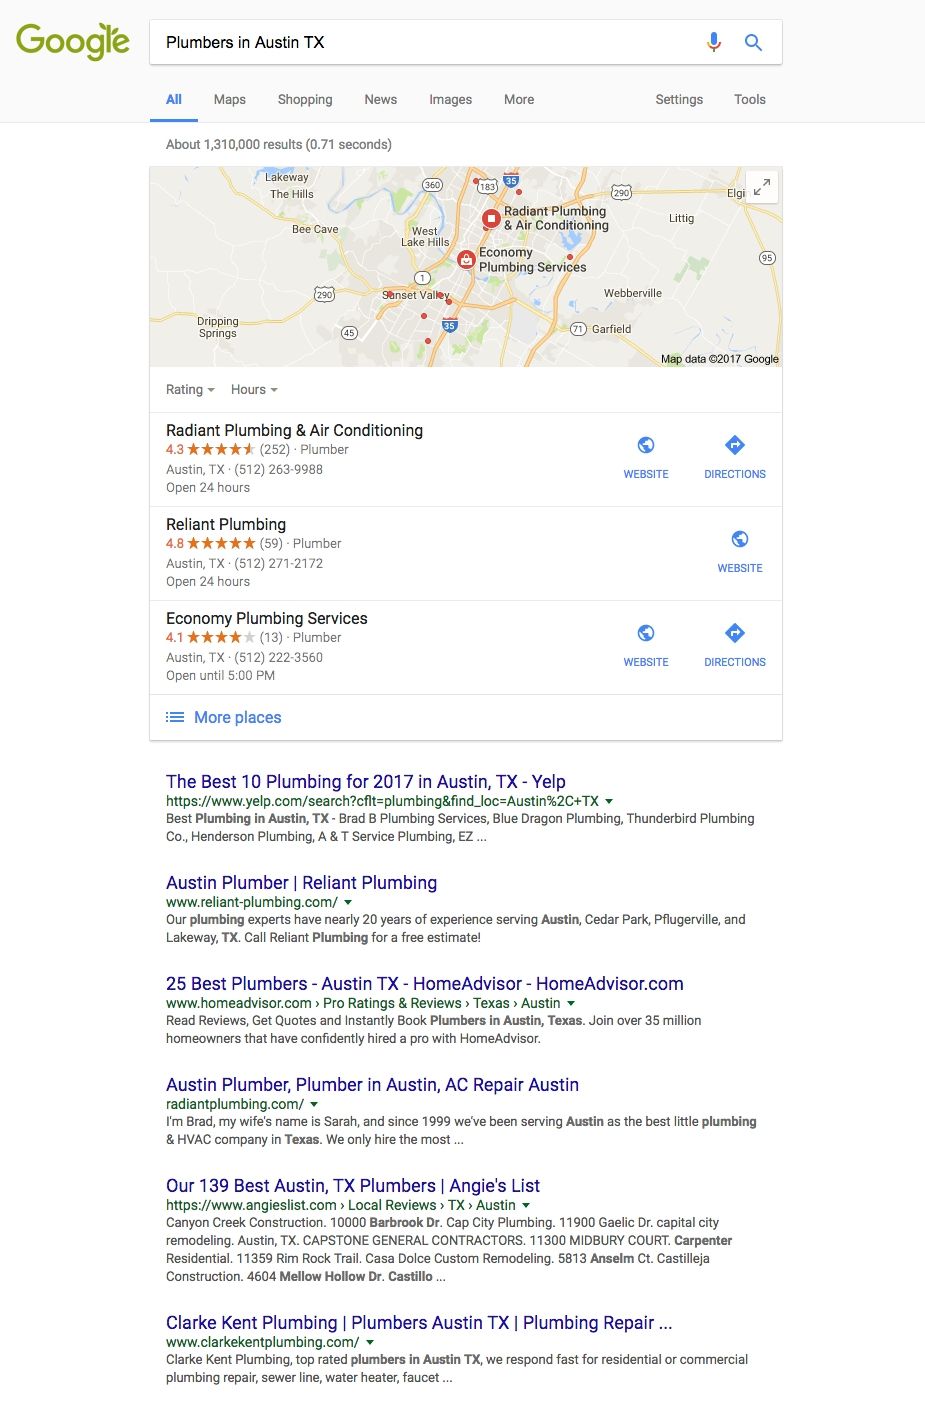 Small business search engine listing for a plumber in Austin, Texas